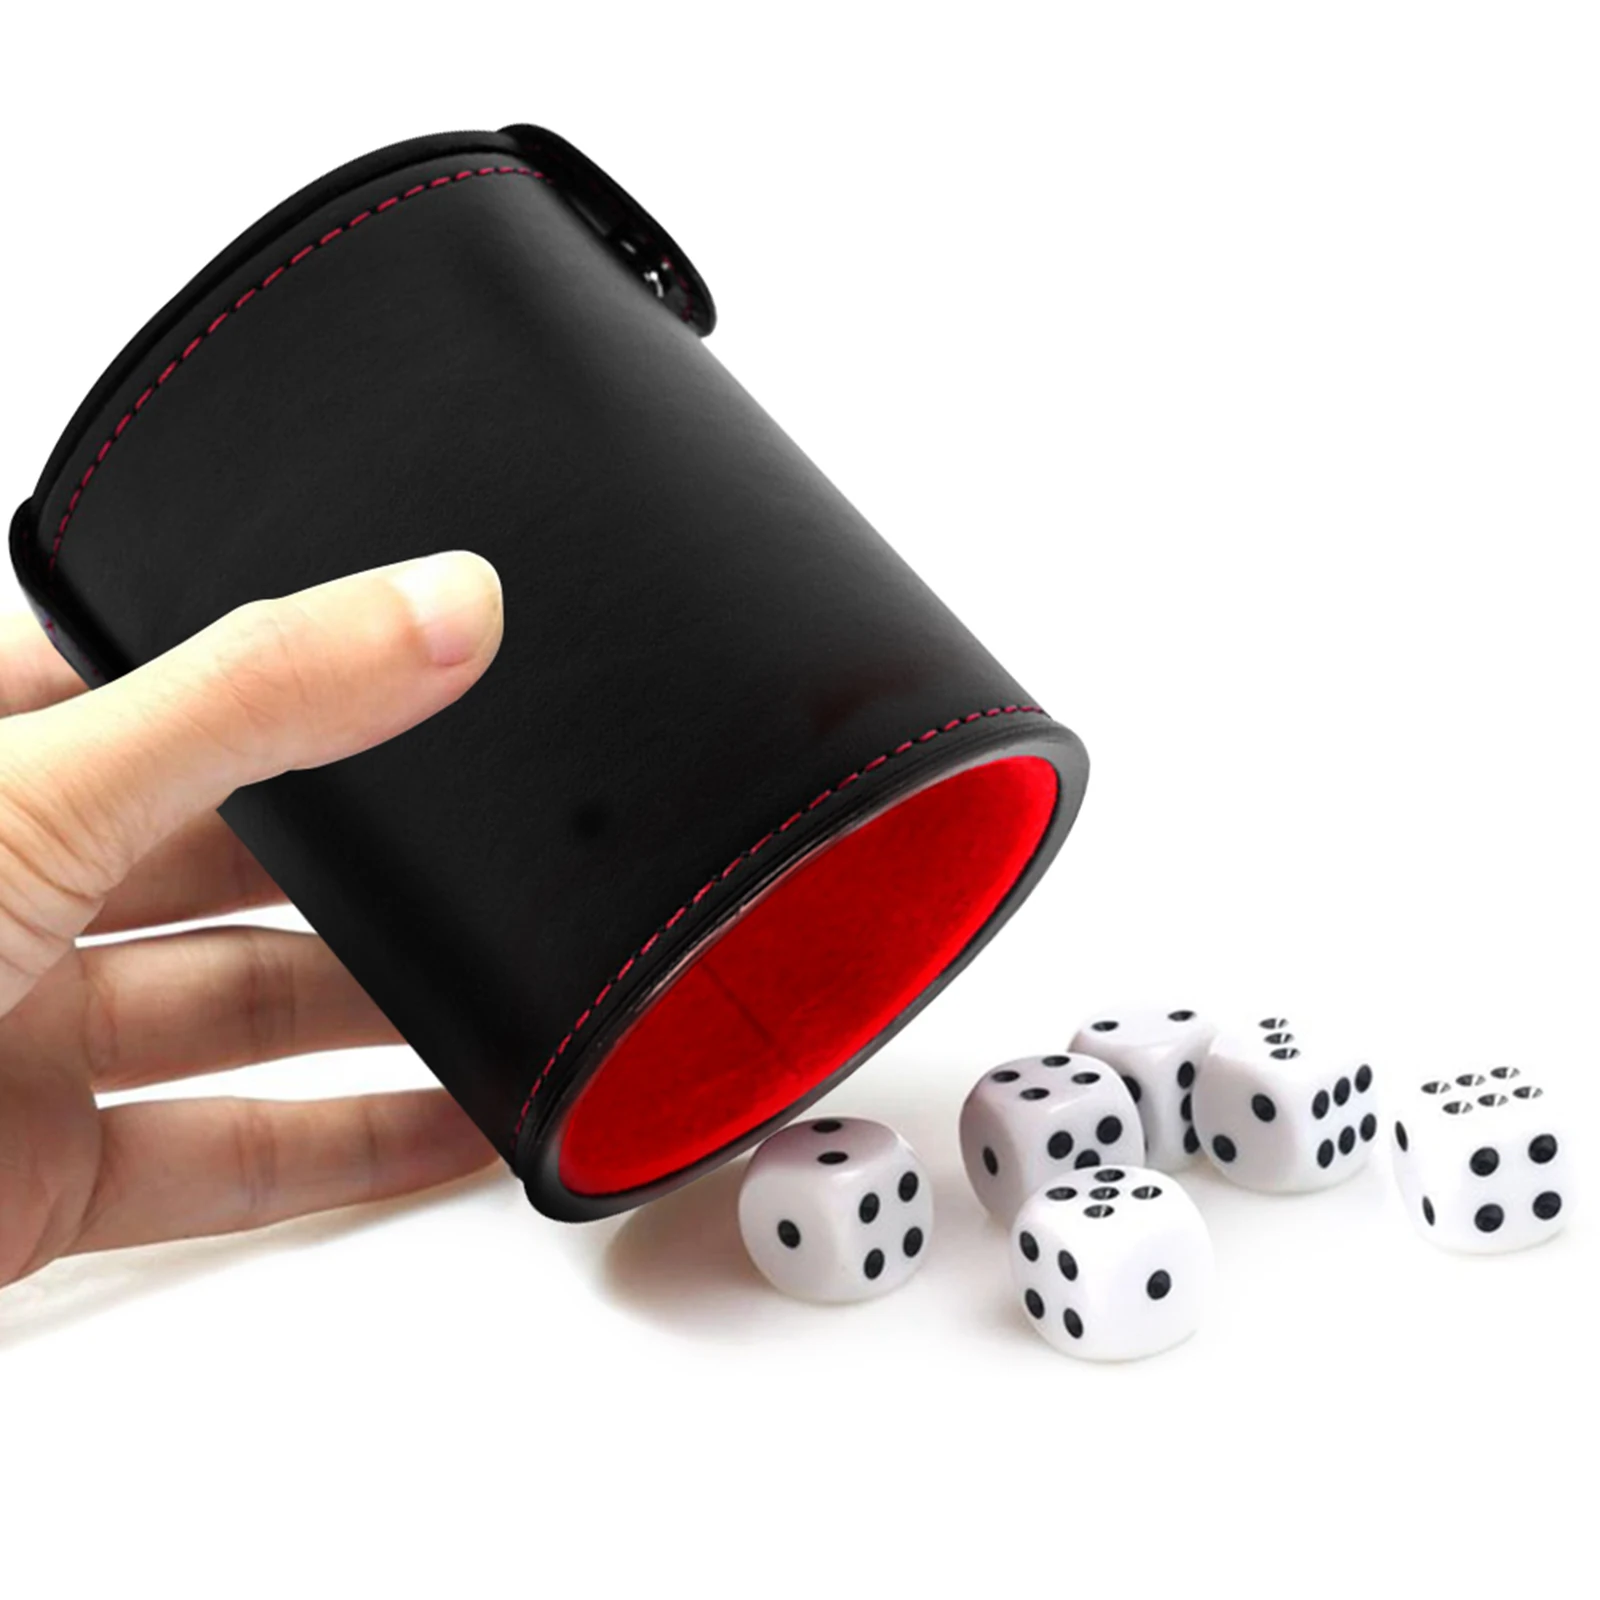 PU Leather Dice Cup with 5 Dice Hand Shaking Dice Cup Dice Shaker Dice Decider Supplies Halloween